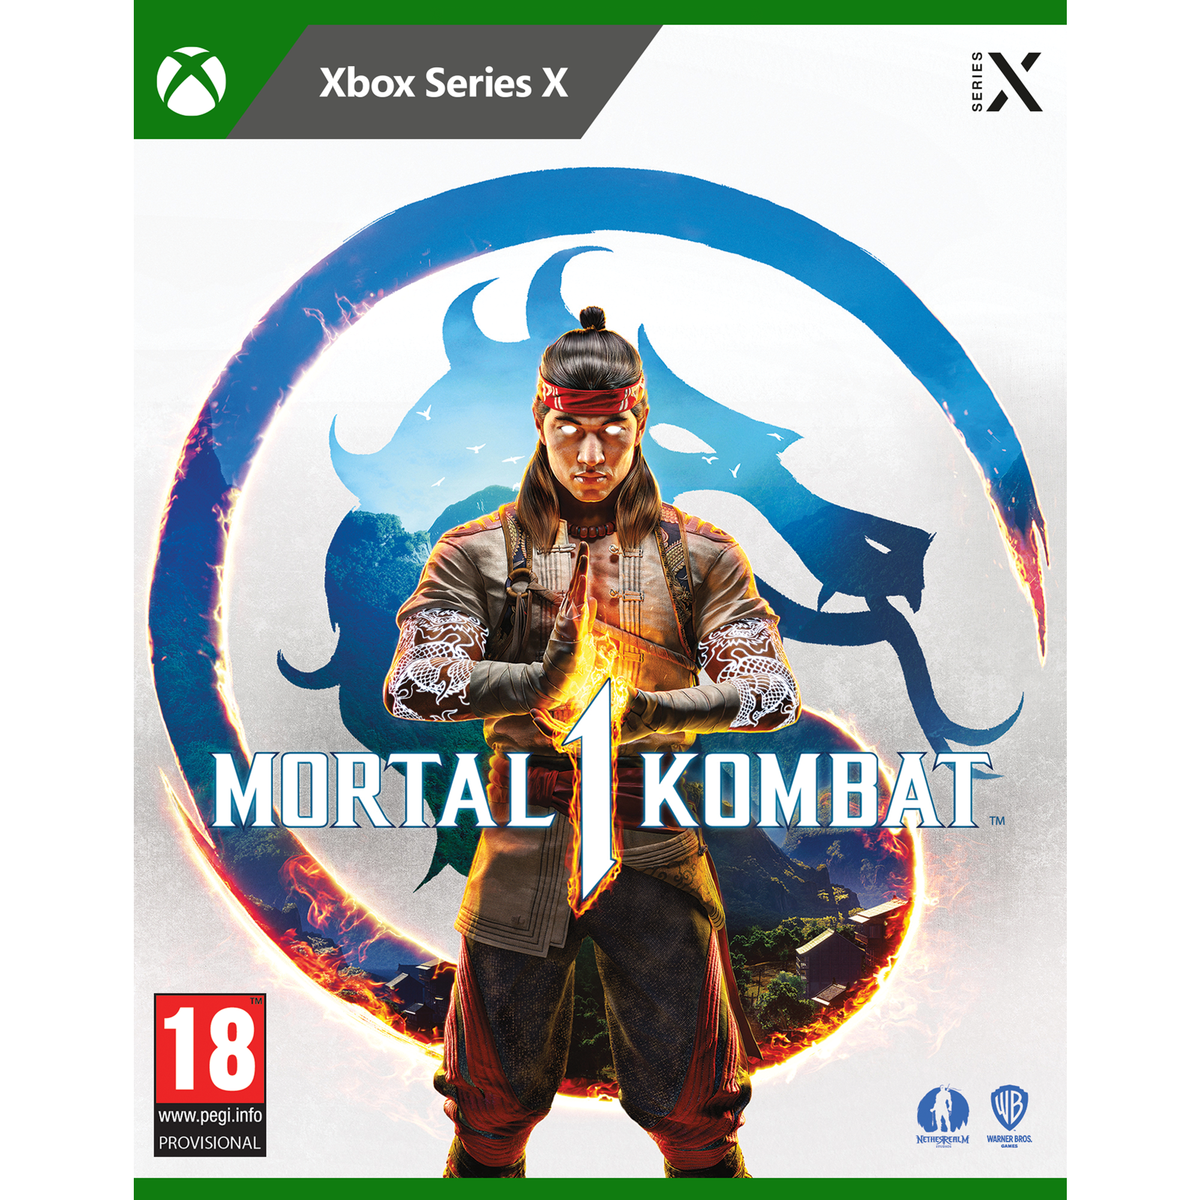 Mortal Kombat 1 - Xbox – Entertainment Go's Deal Of The Day!